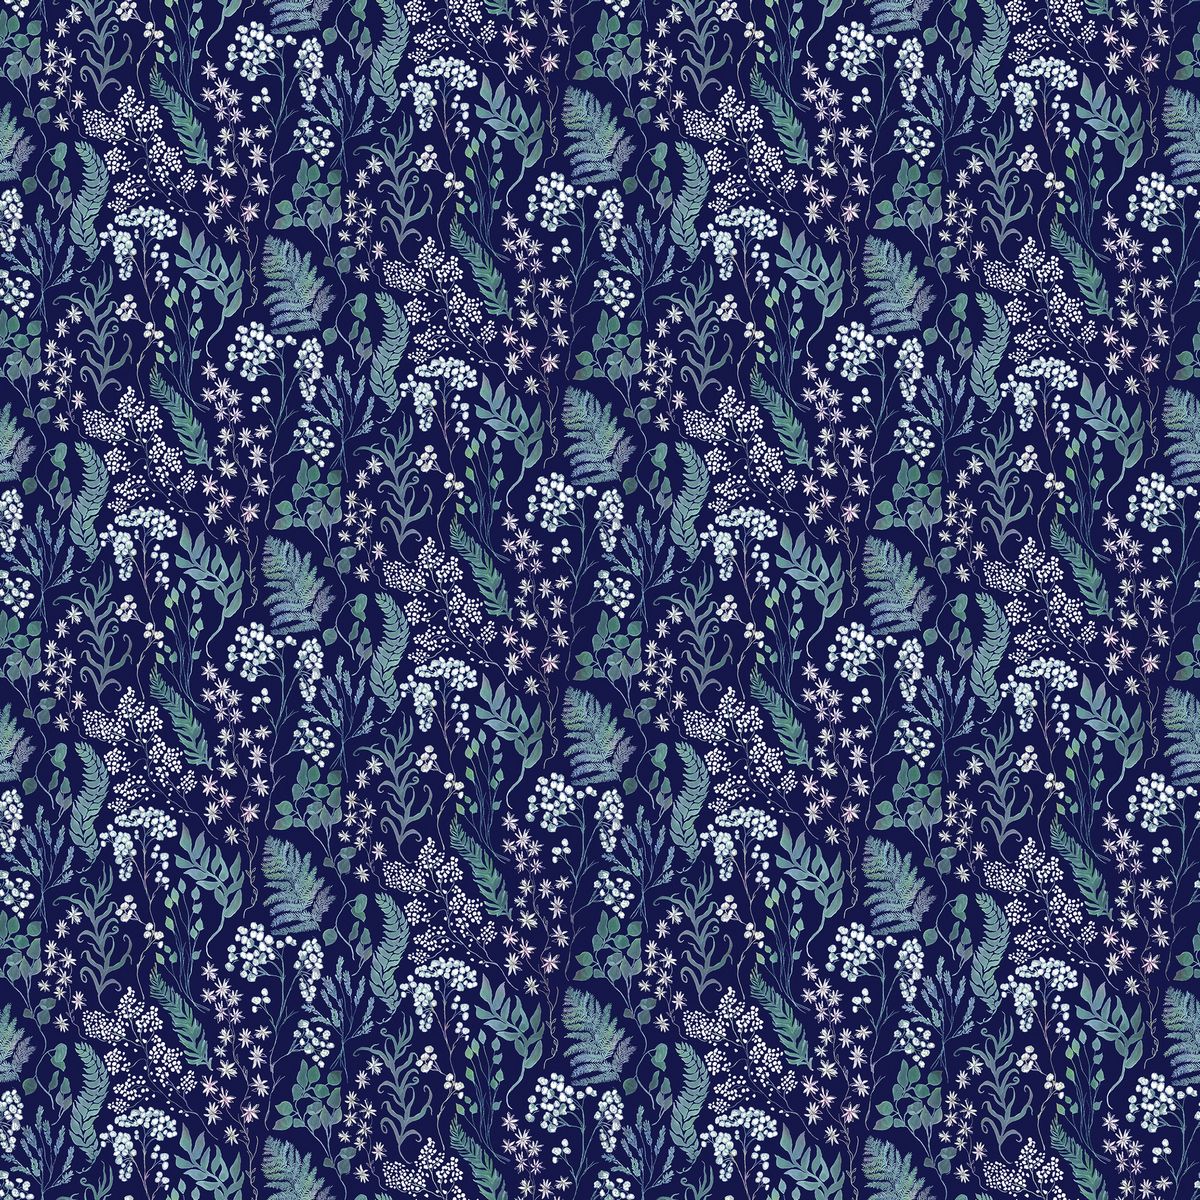 Aileana Ocean Fabric by Voyage Maison